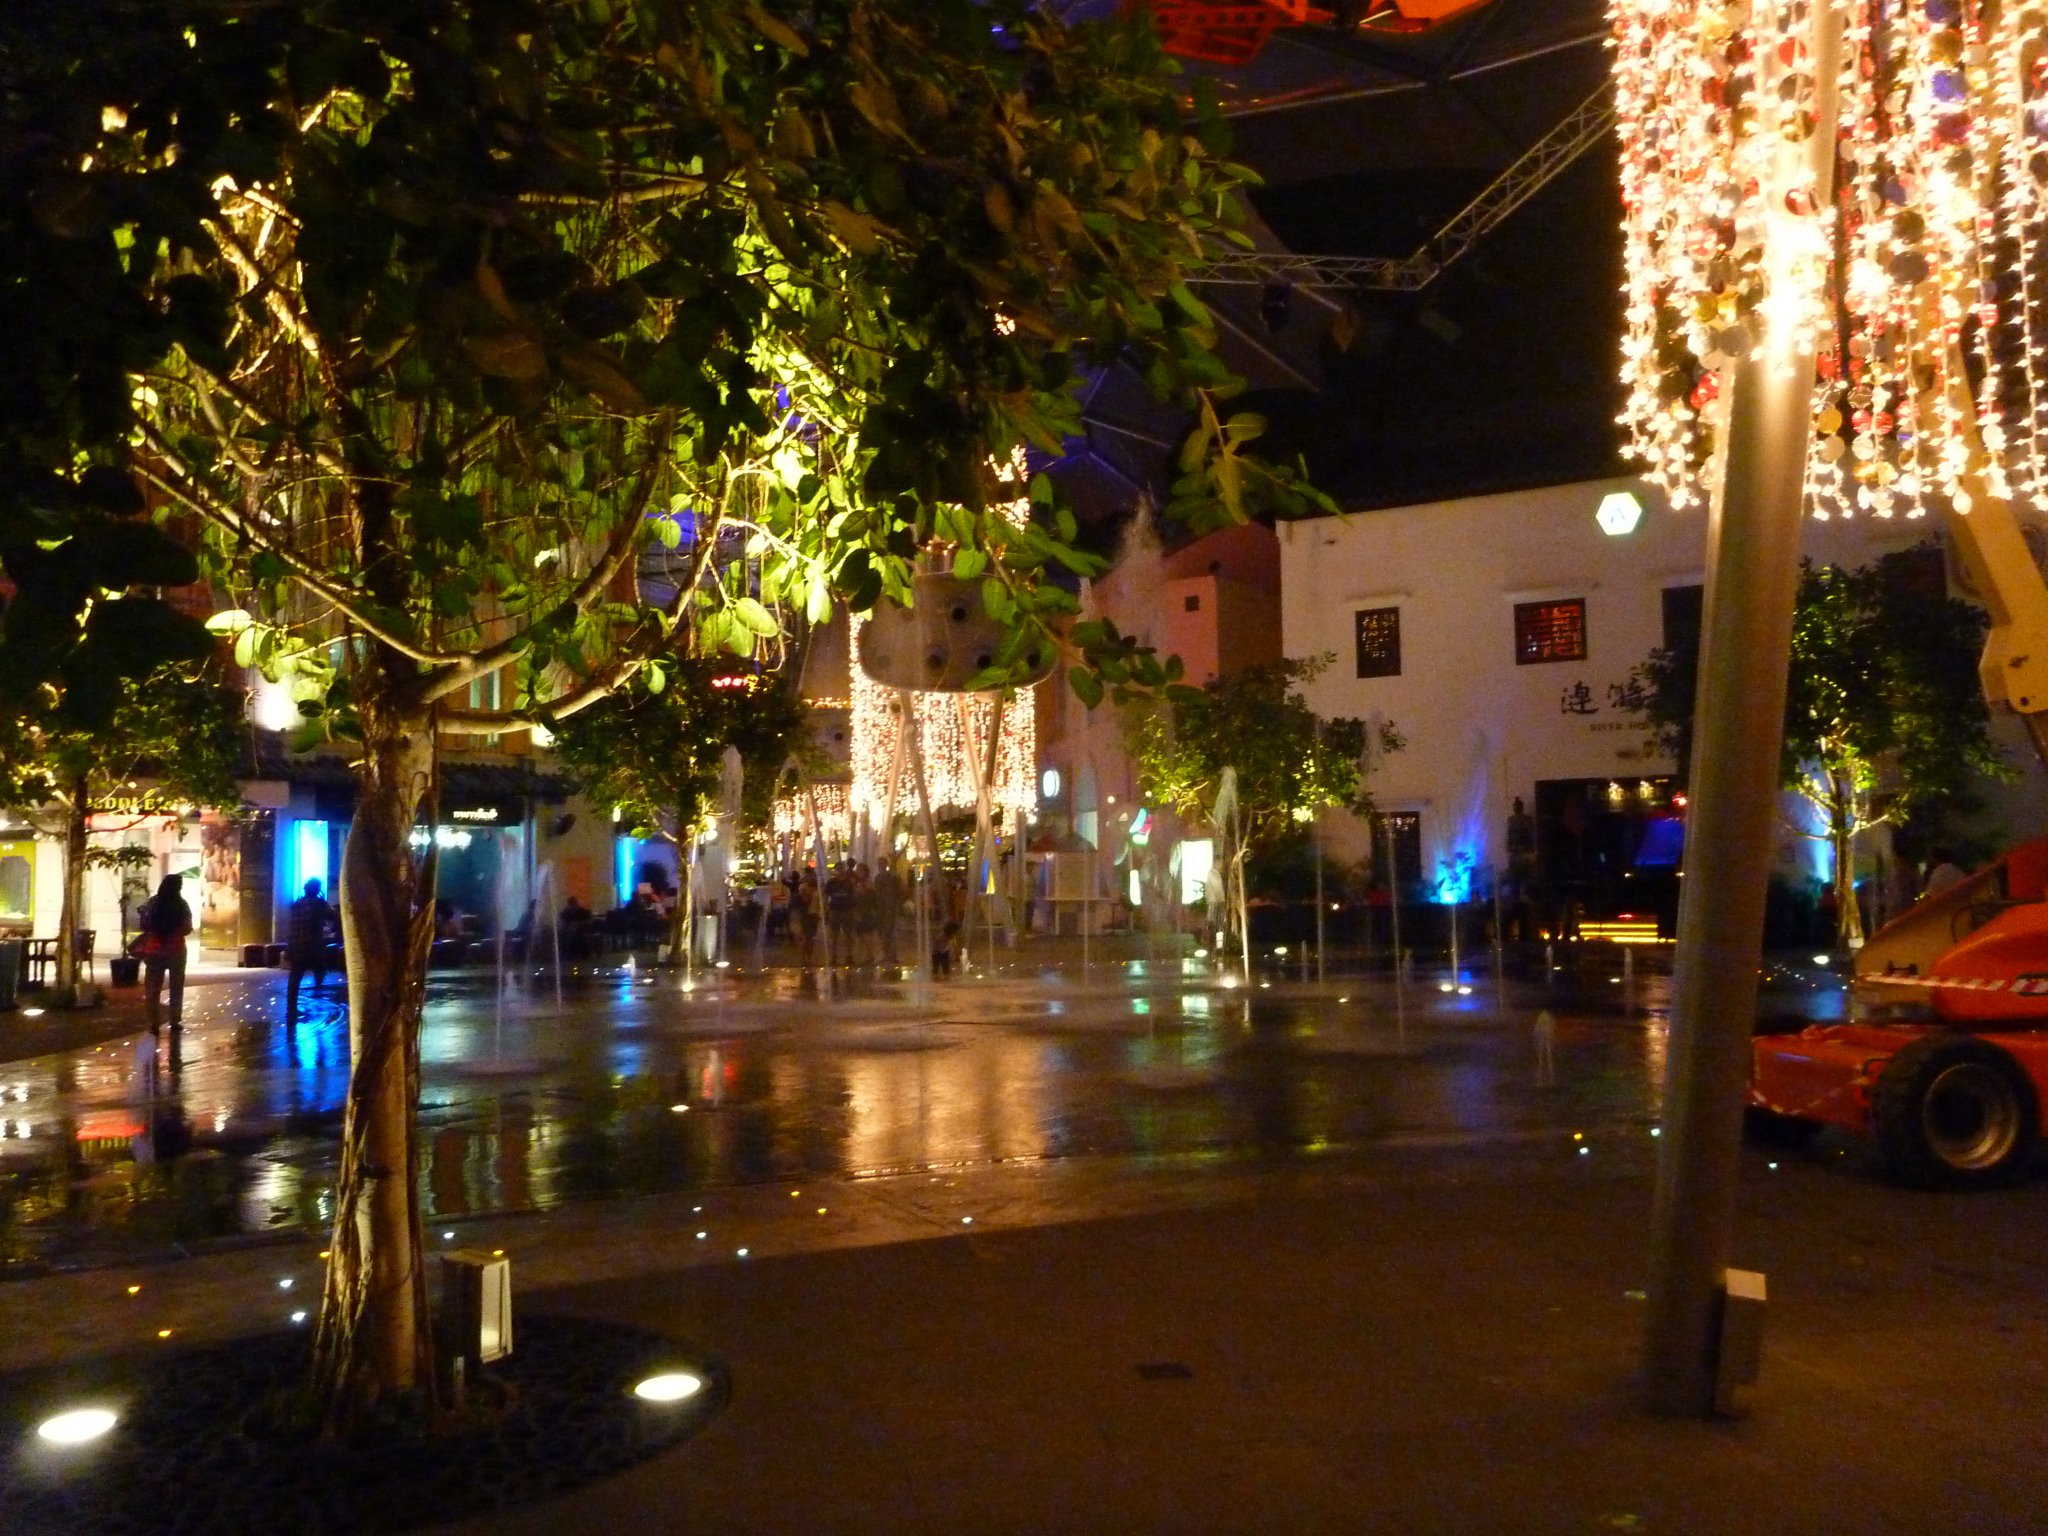 several trees are lit up at night on the wet sidewalk